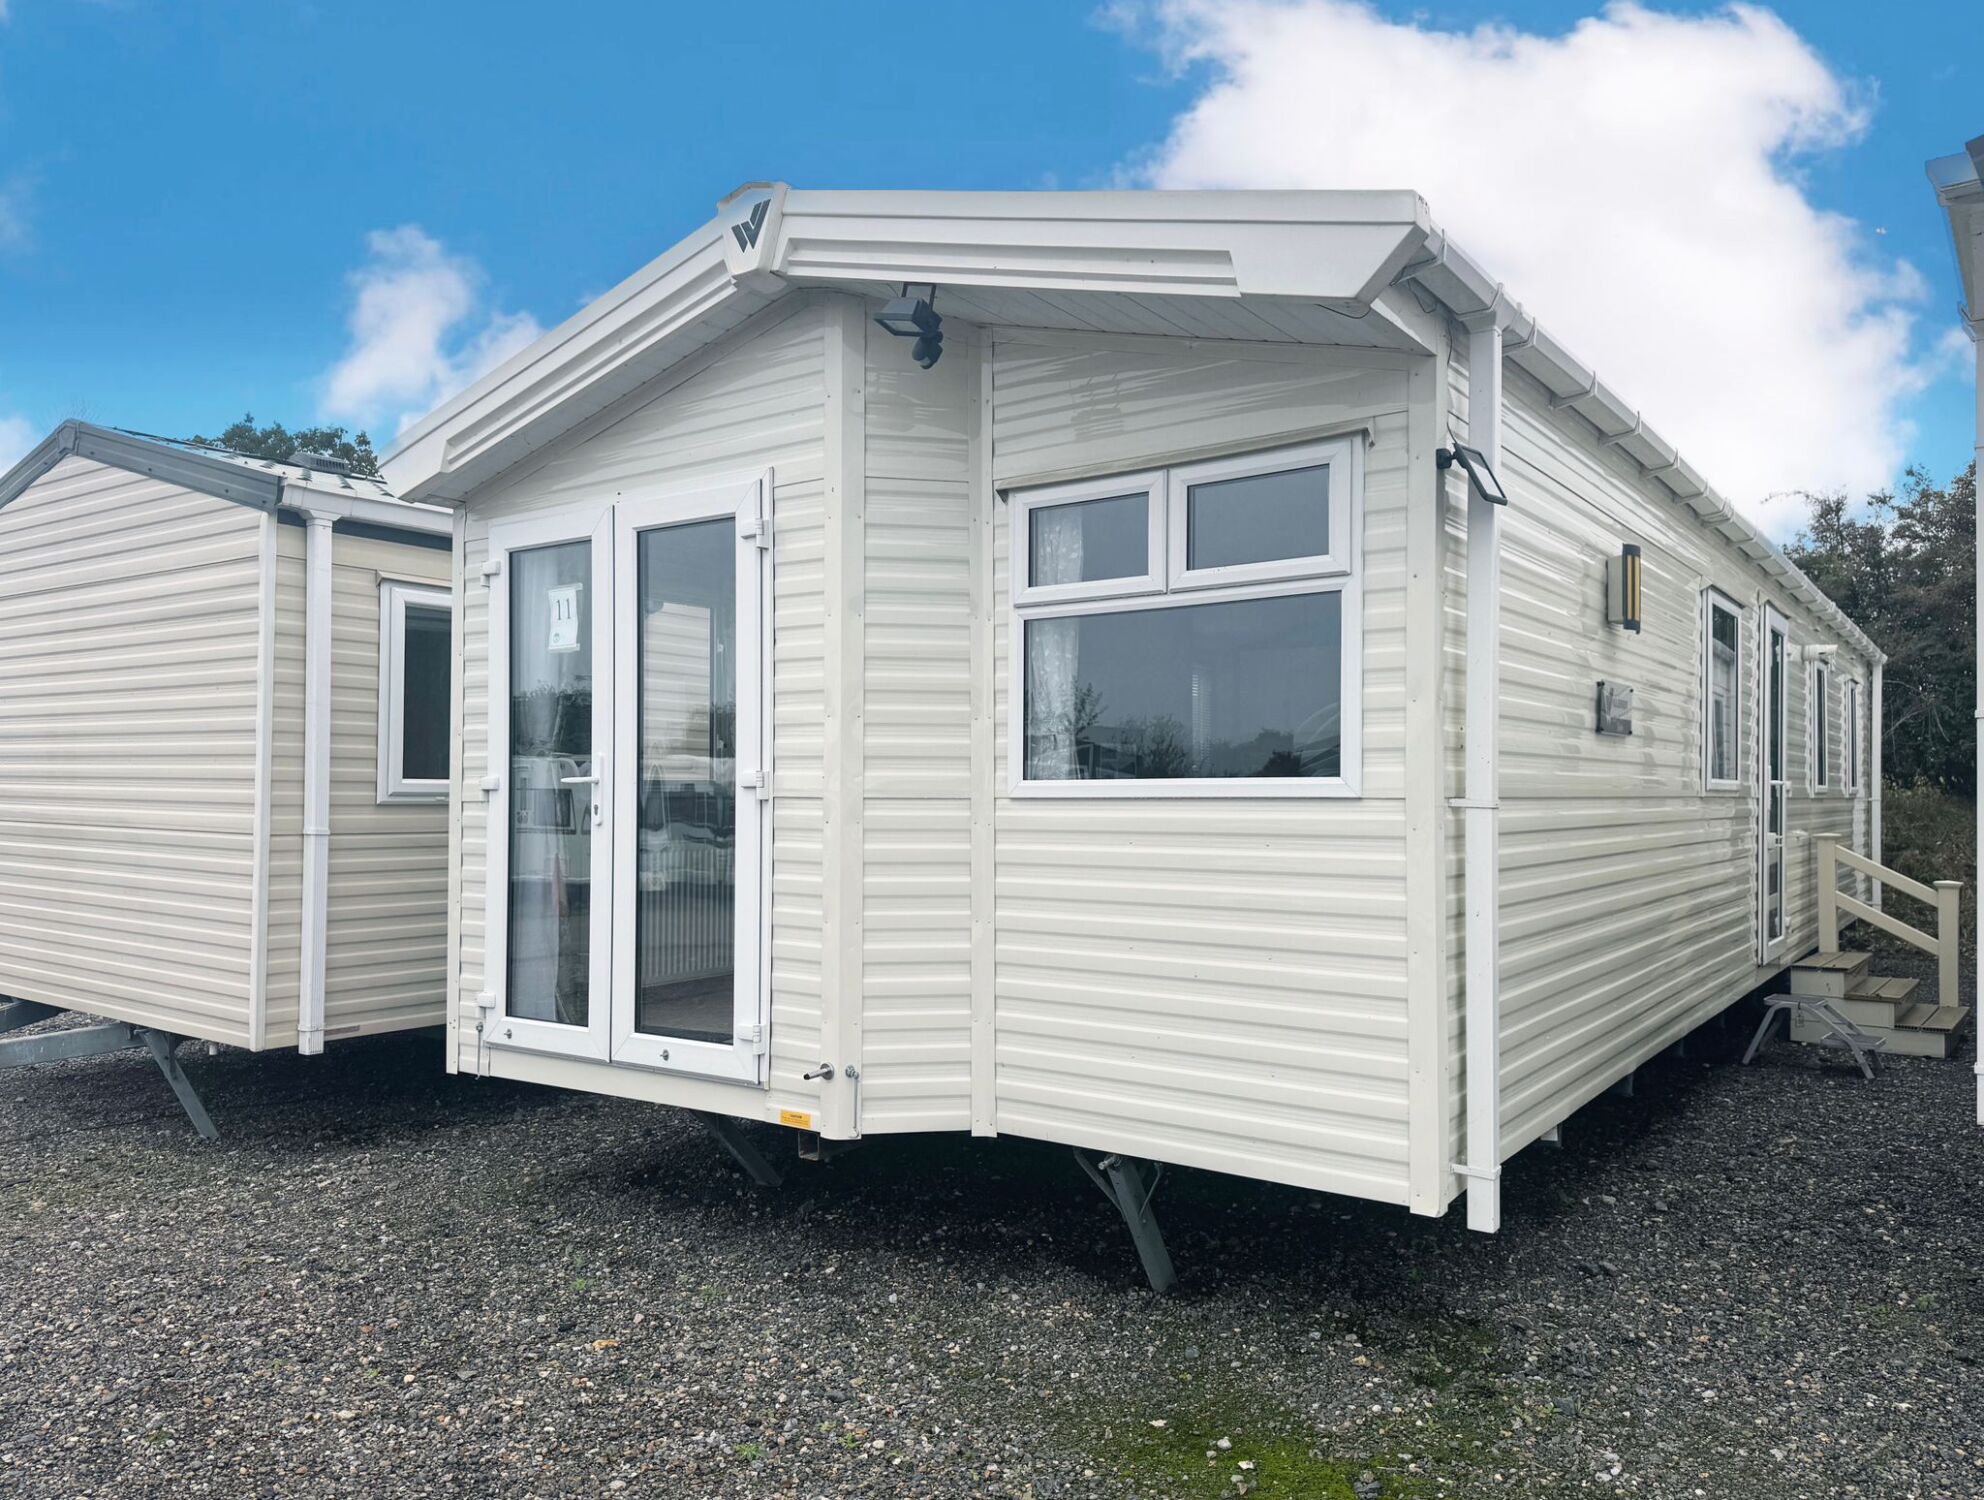 Pre owned 2018 Willerby Skye Exterior side angle static caravan mobile home